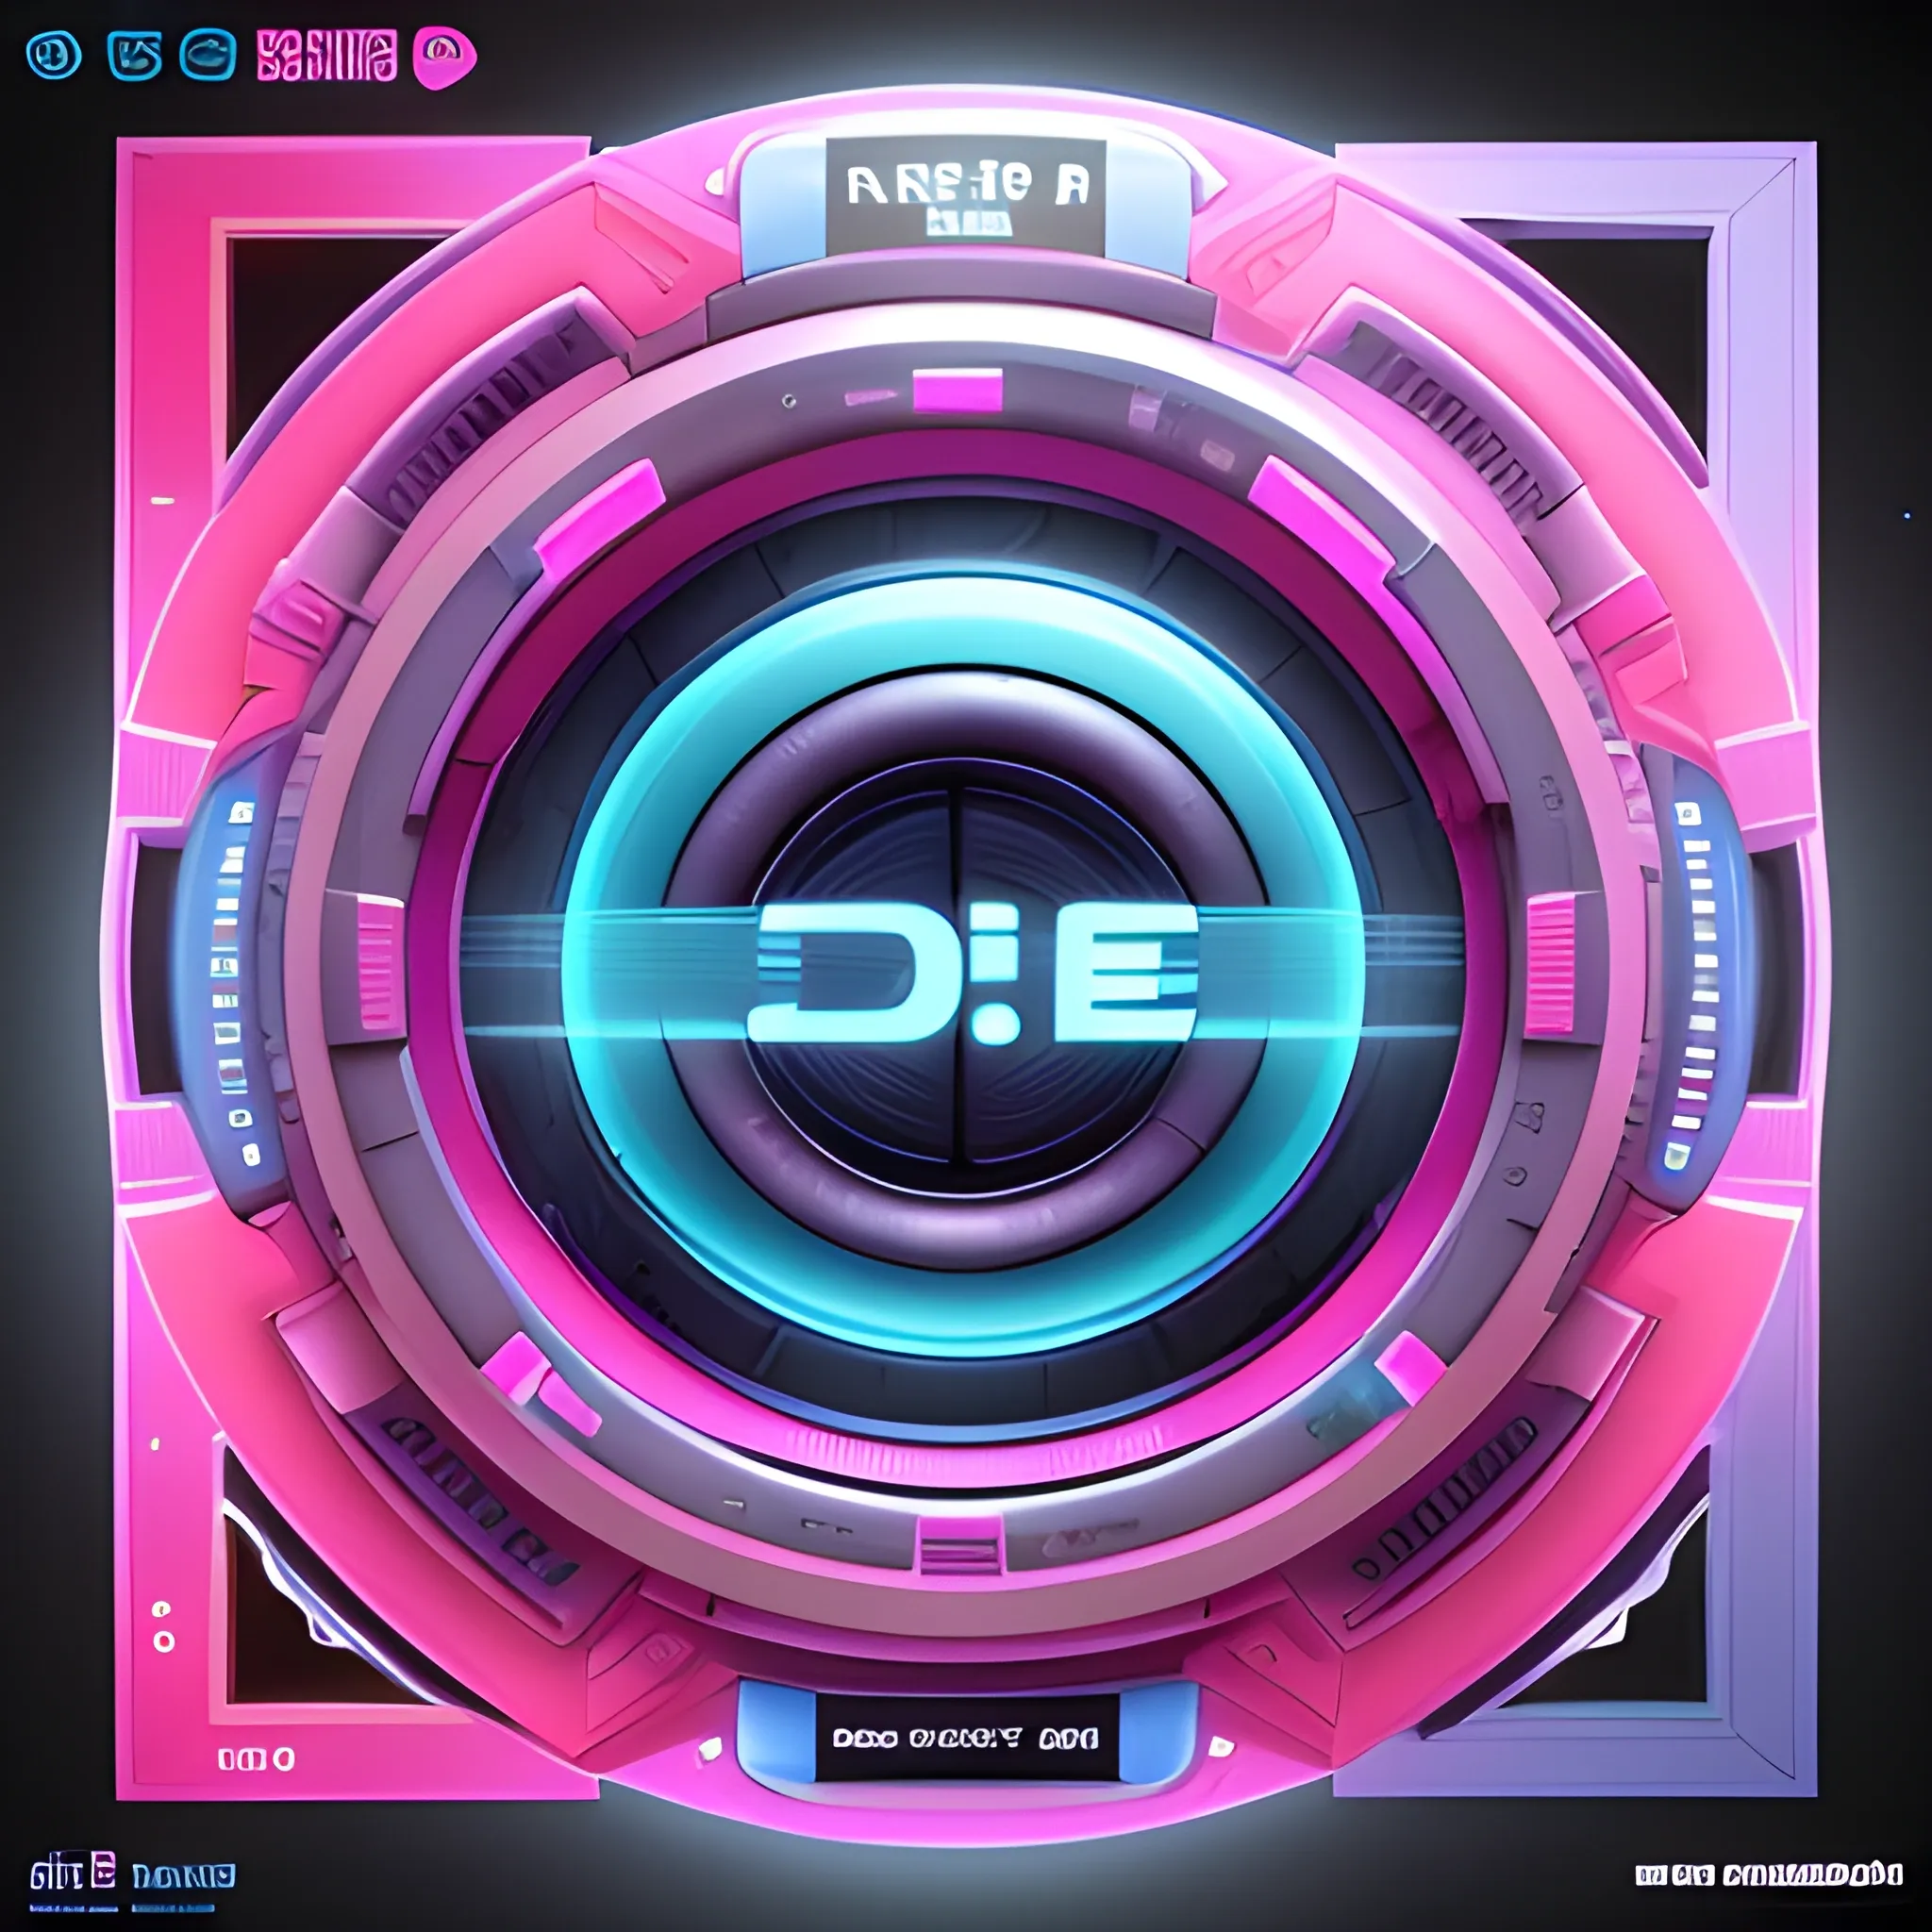 3D, Sci-Fi, Hip-hop, Urban, pink and cyan colored, circular avatar. high-definition, realistic, intricate detailing, embossed circular subwoofer frame, "Verb8eM" written centered inside, transparent background